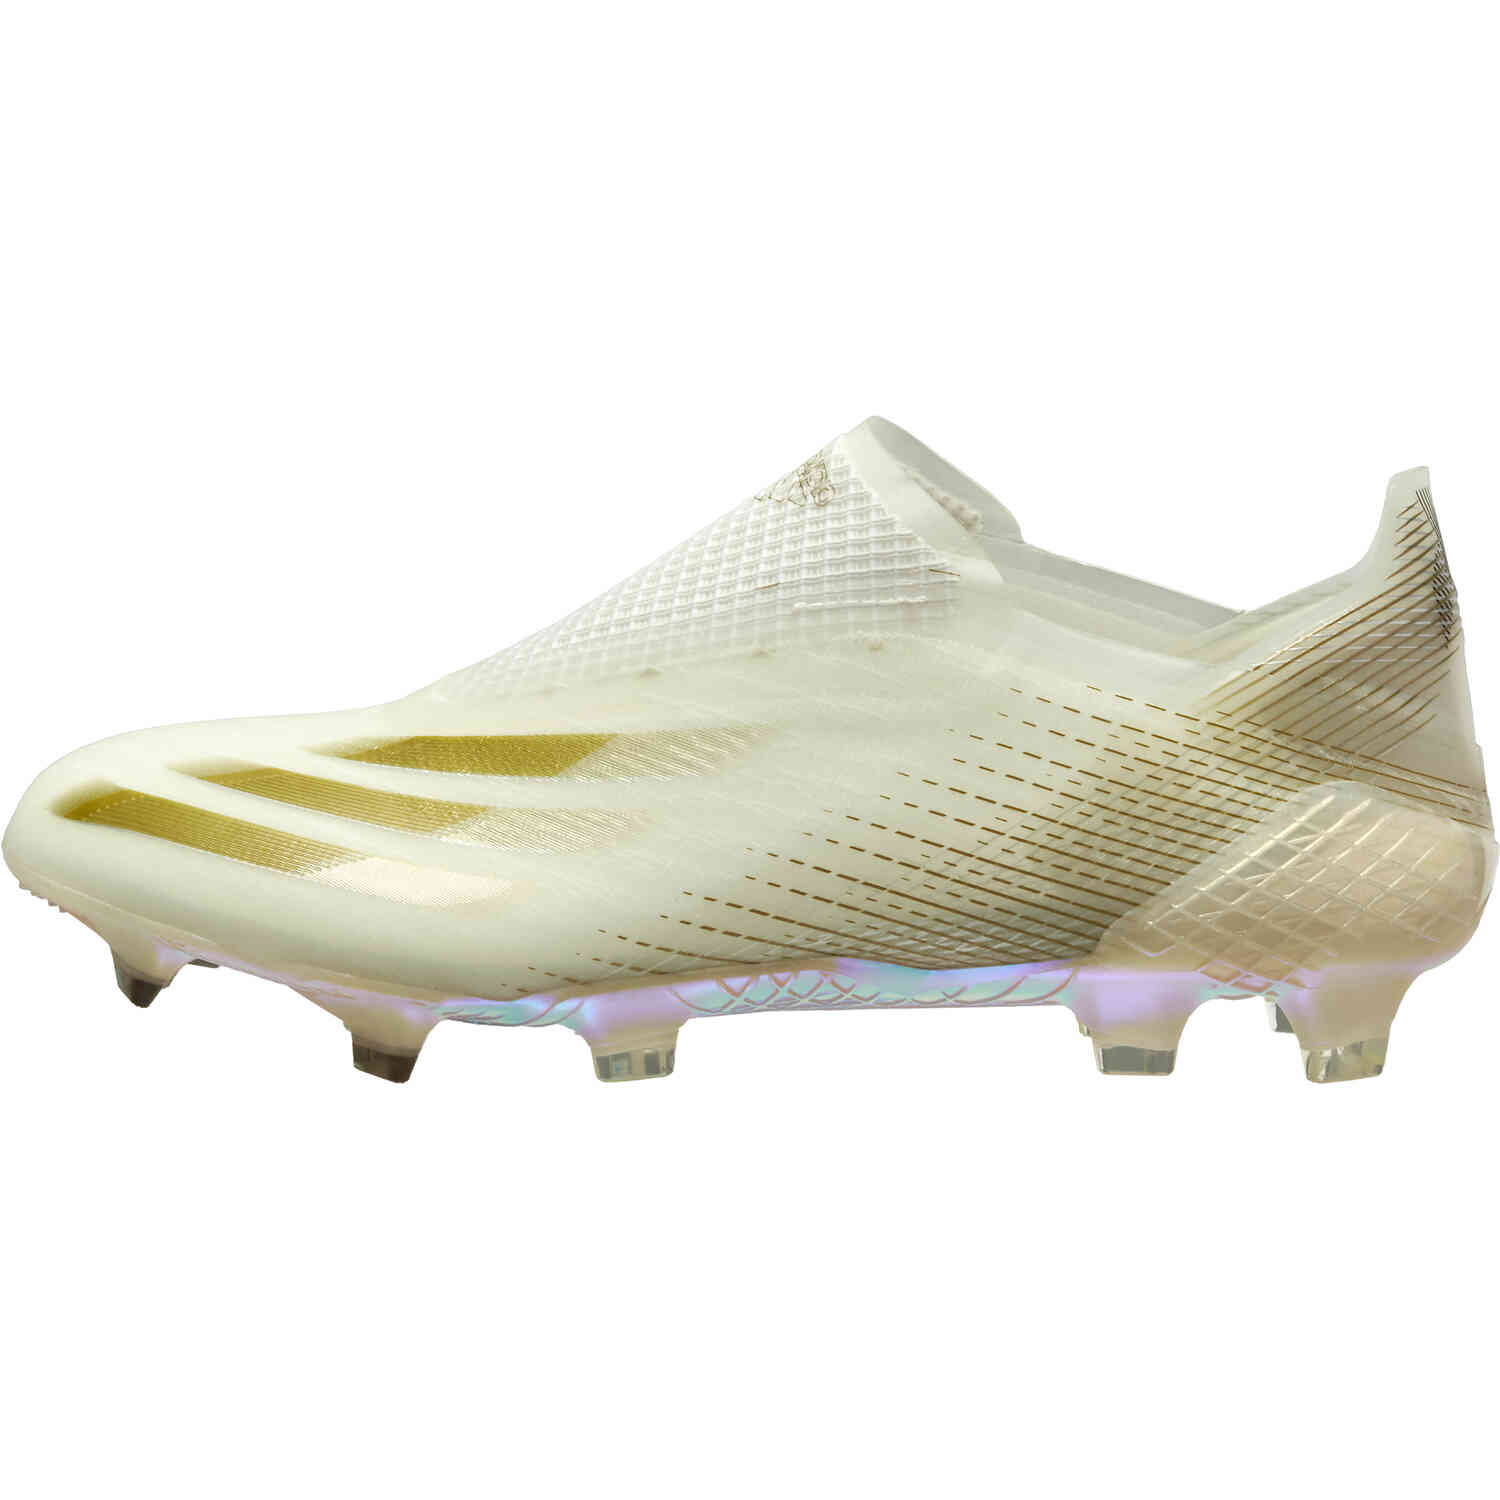 adidas X Ghosted+ FG Soccer Cleats - InFlight - SoccerPro